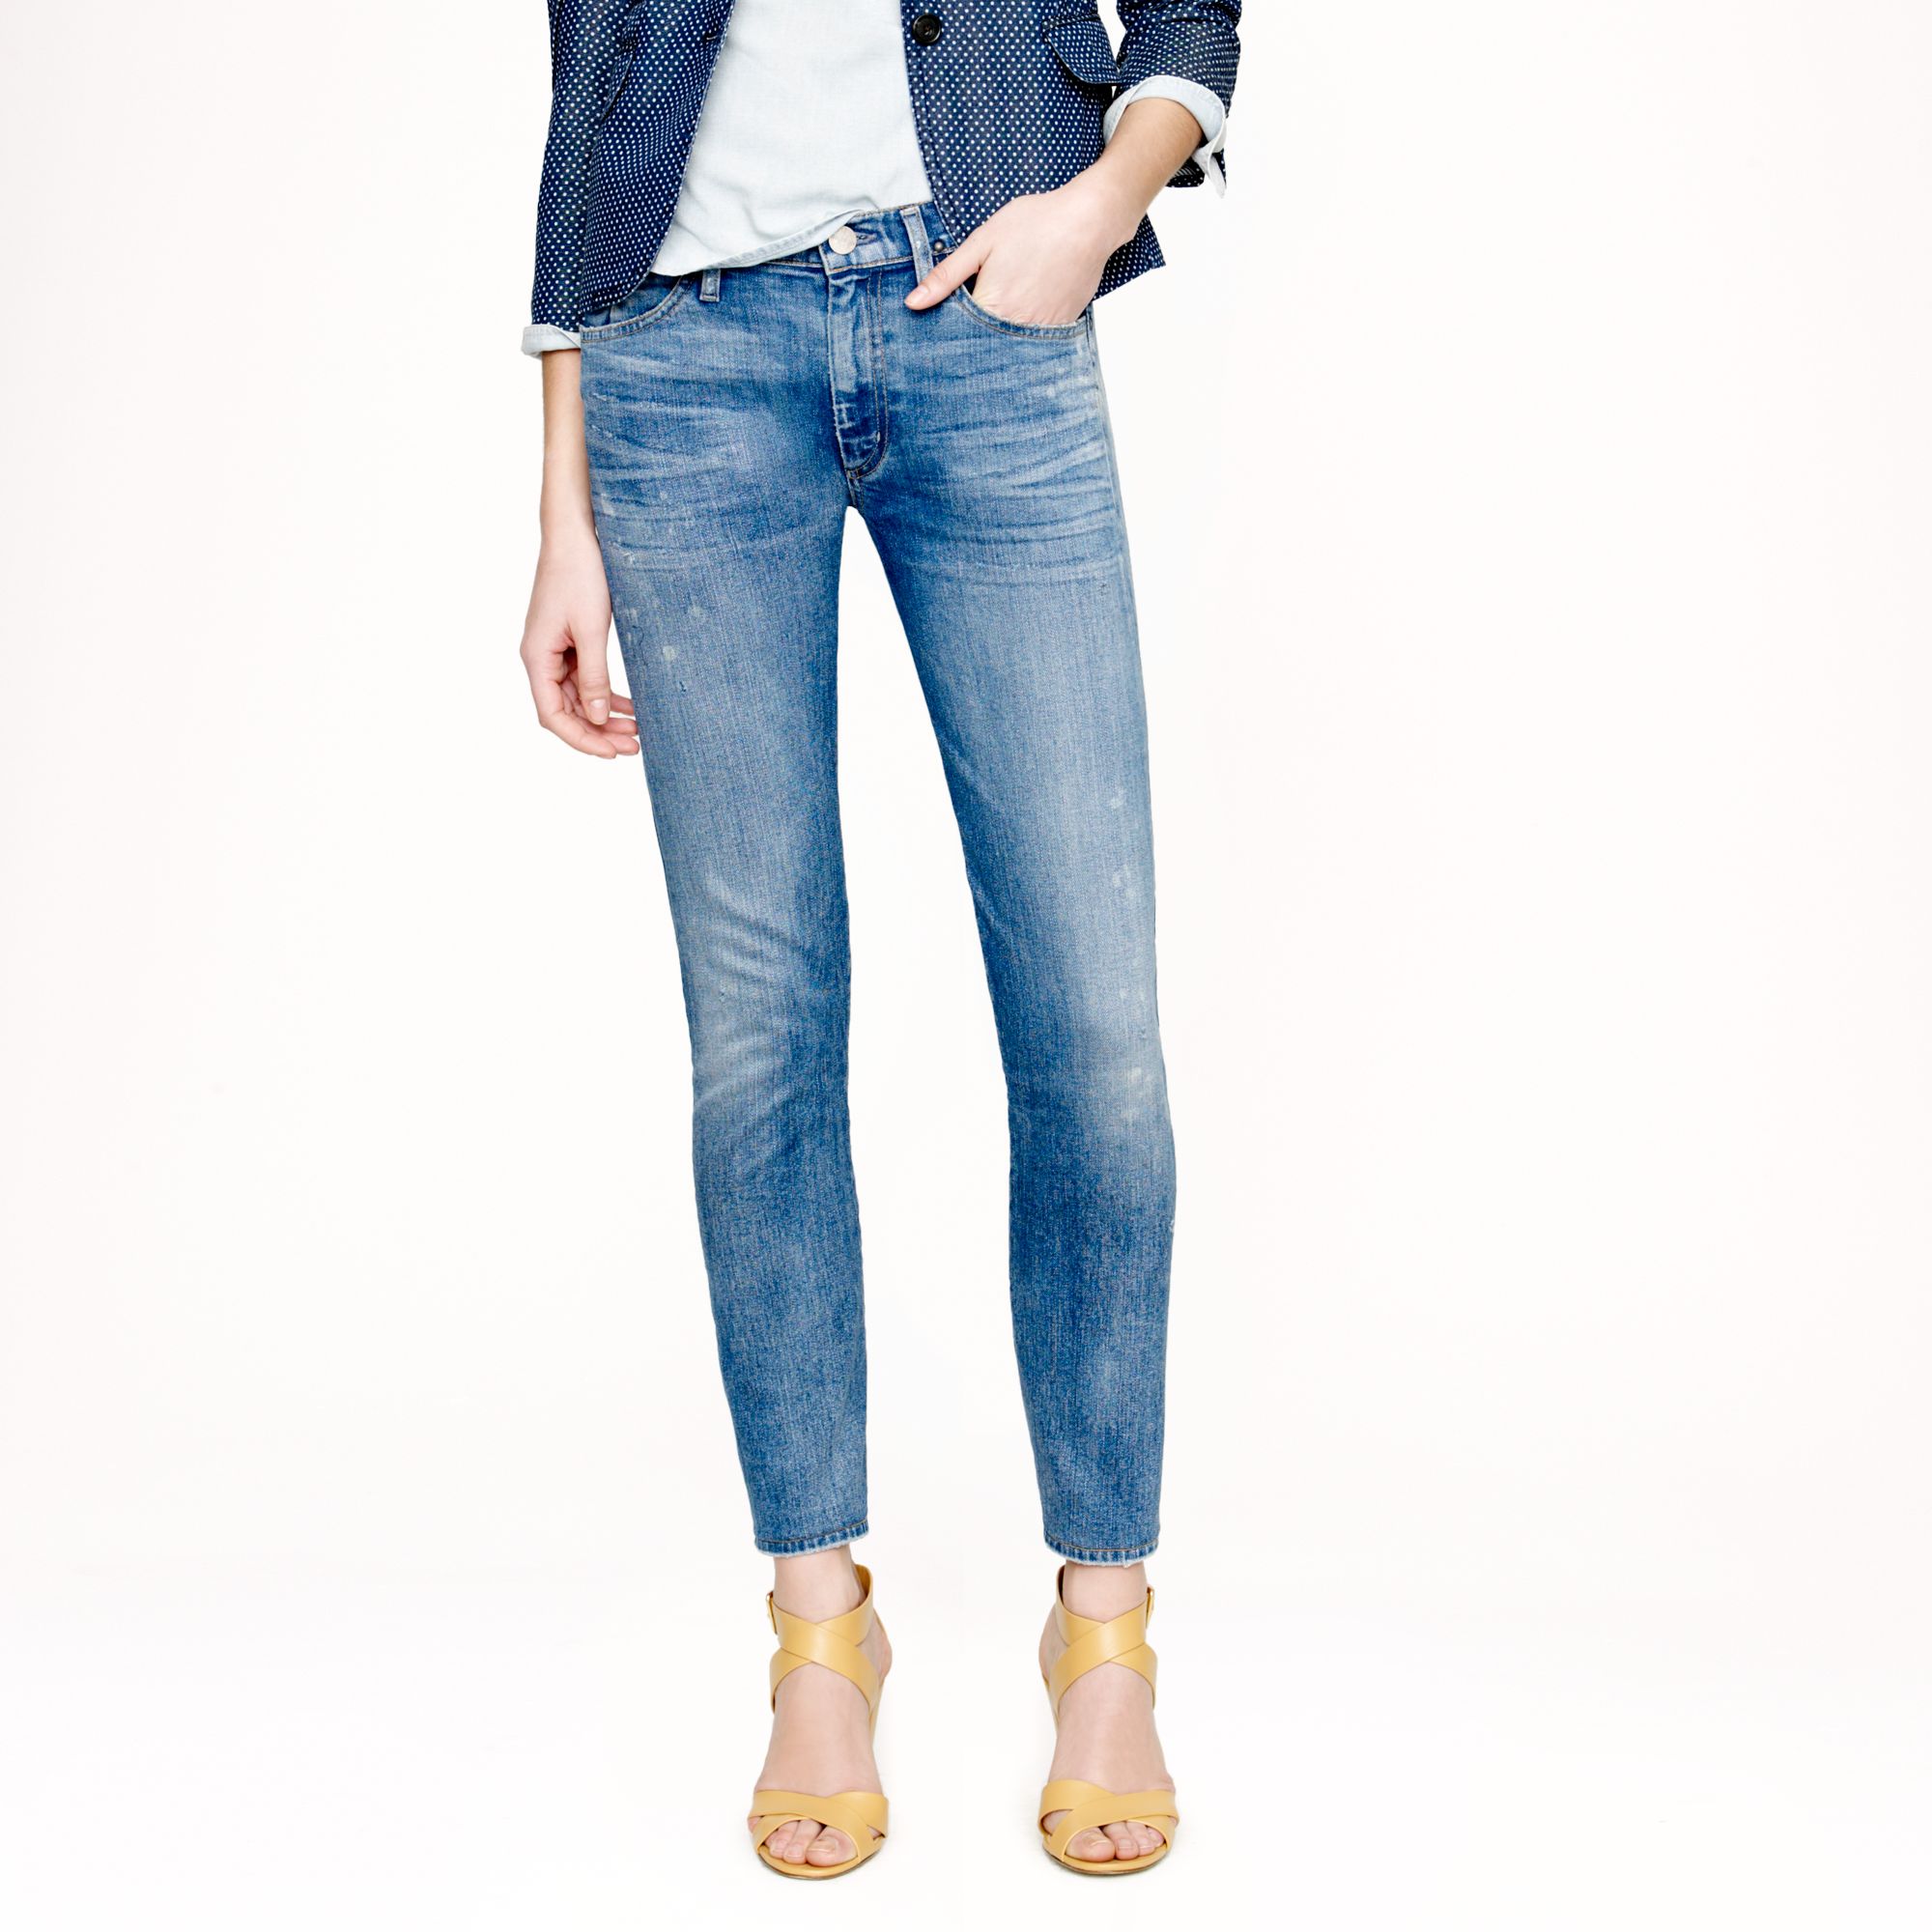 Lyst - J.Crew Goldsign For Jcrew Jenny Jean in Cahuenga Wash in Blue